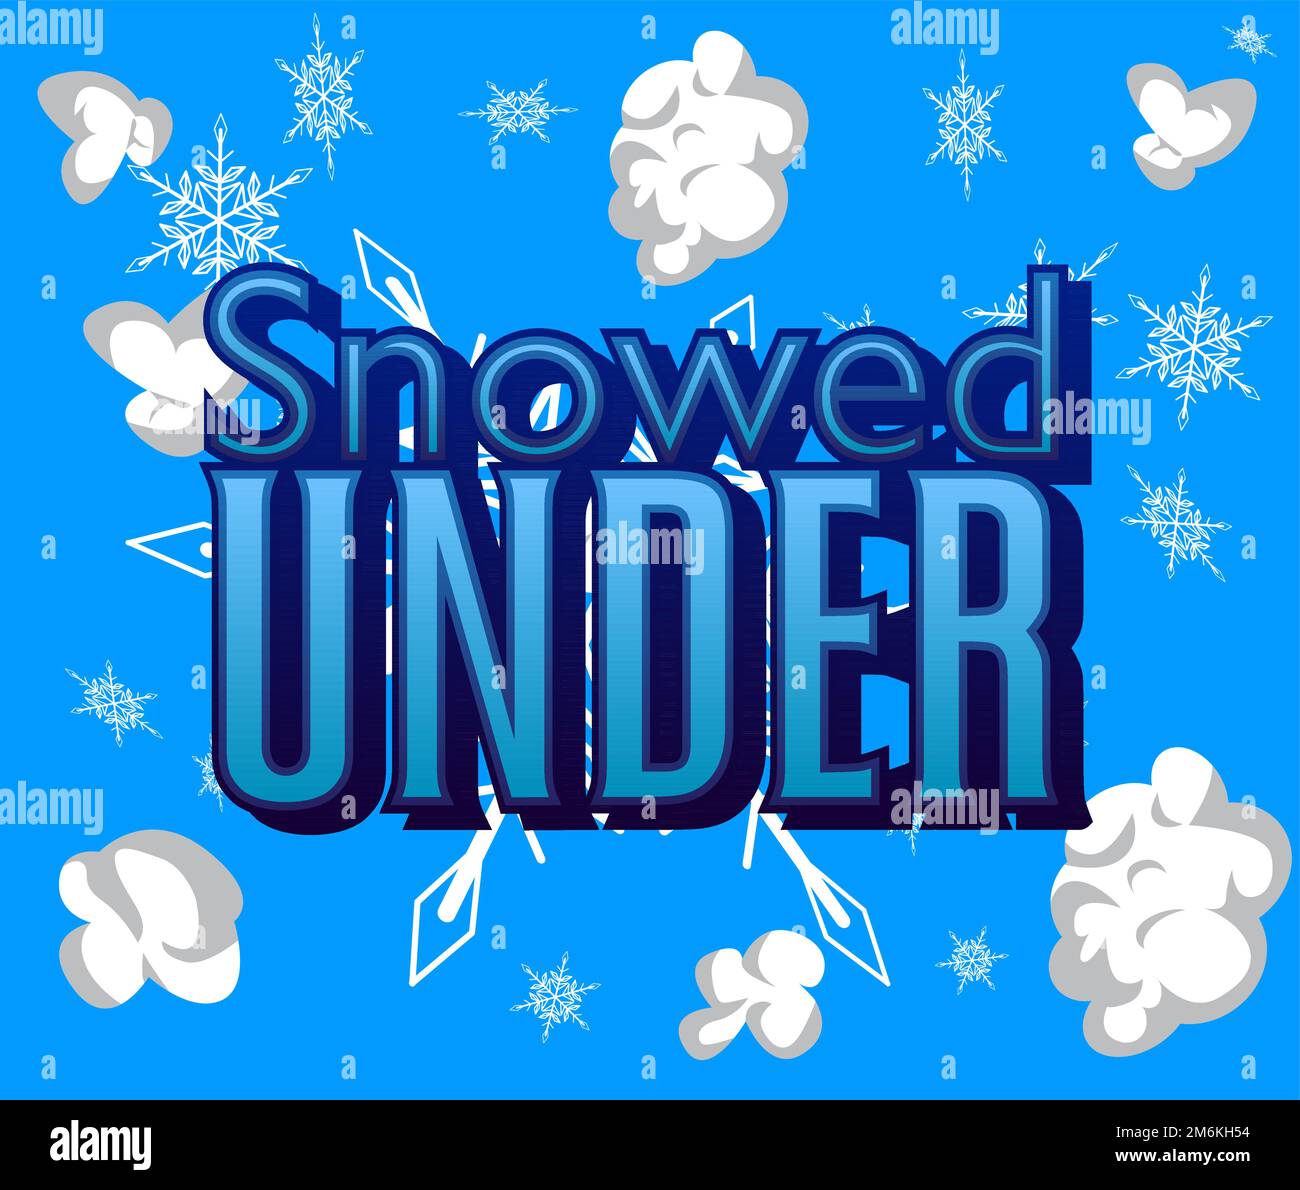 Snowflake background with Snowed Under text. Event poster, Winter, Snow banner. Stock Vector